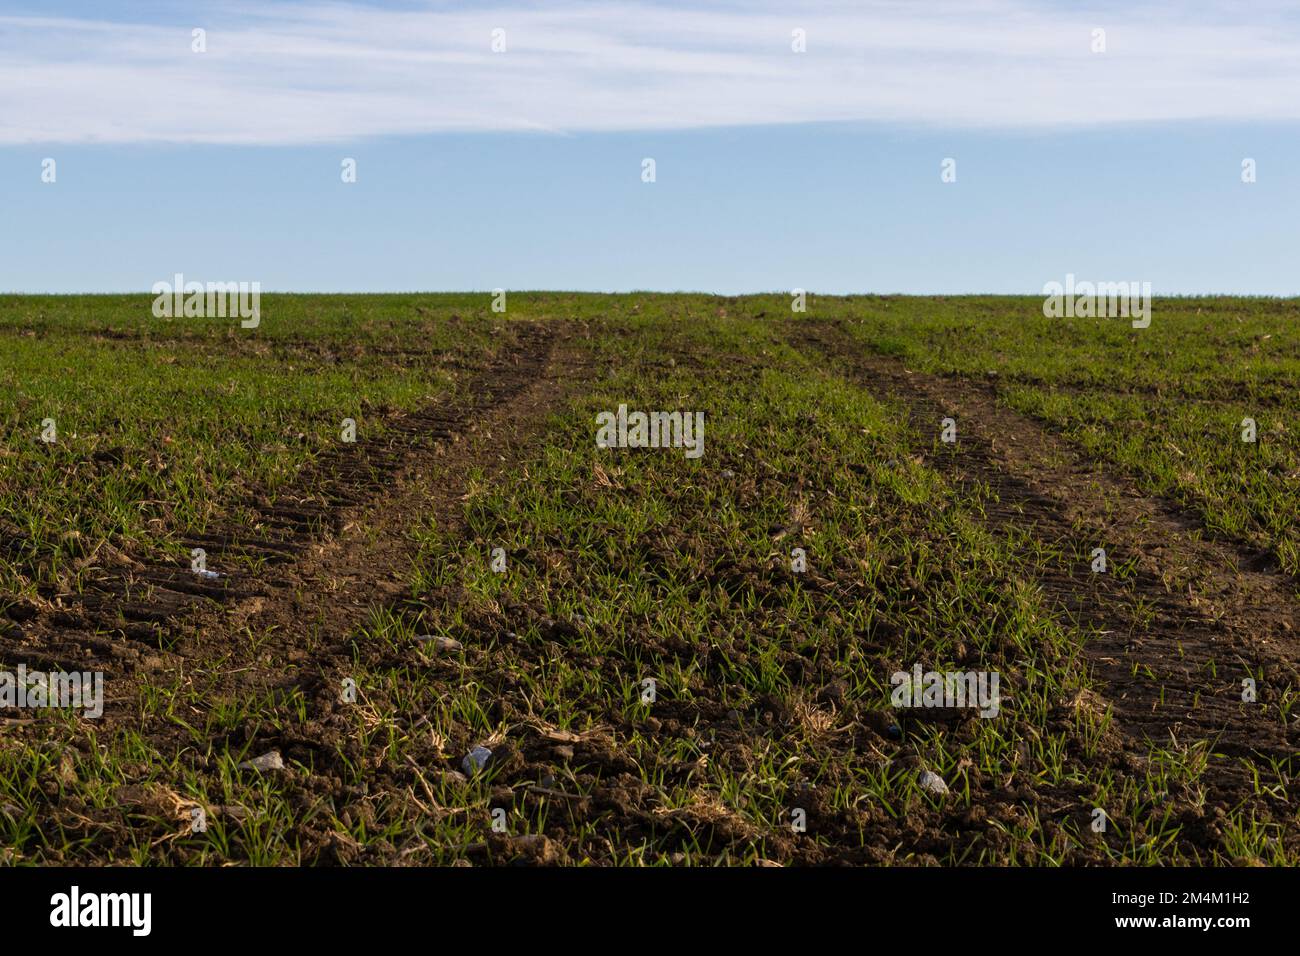 Tractor tracks in a agricultural field Stock Photo